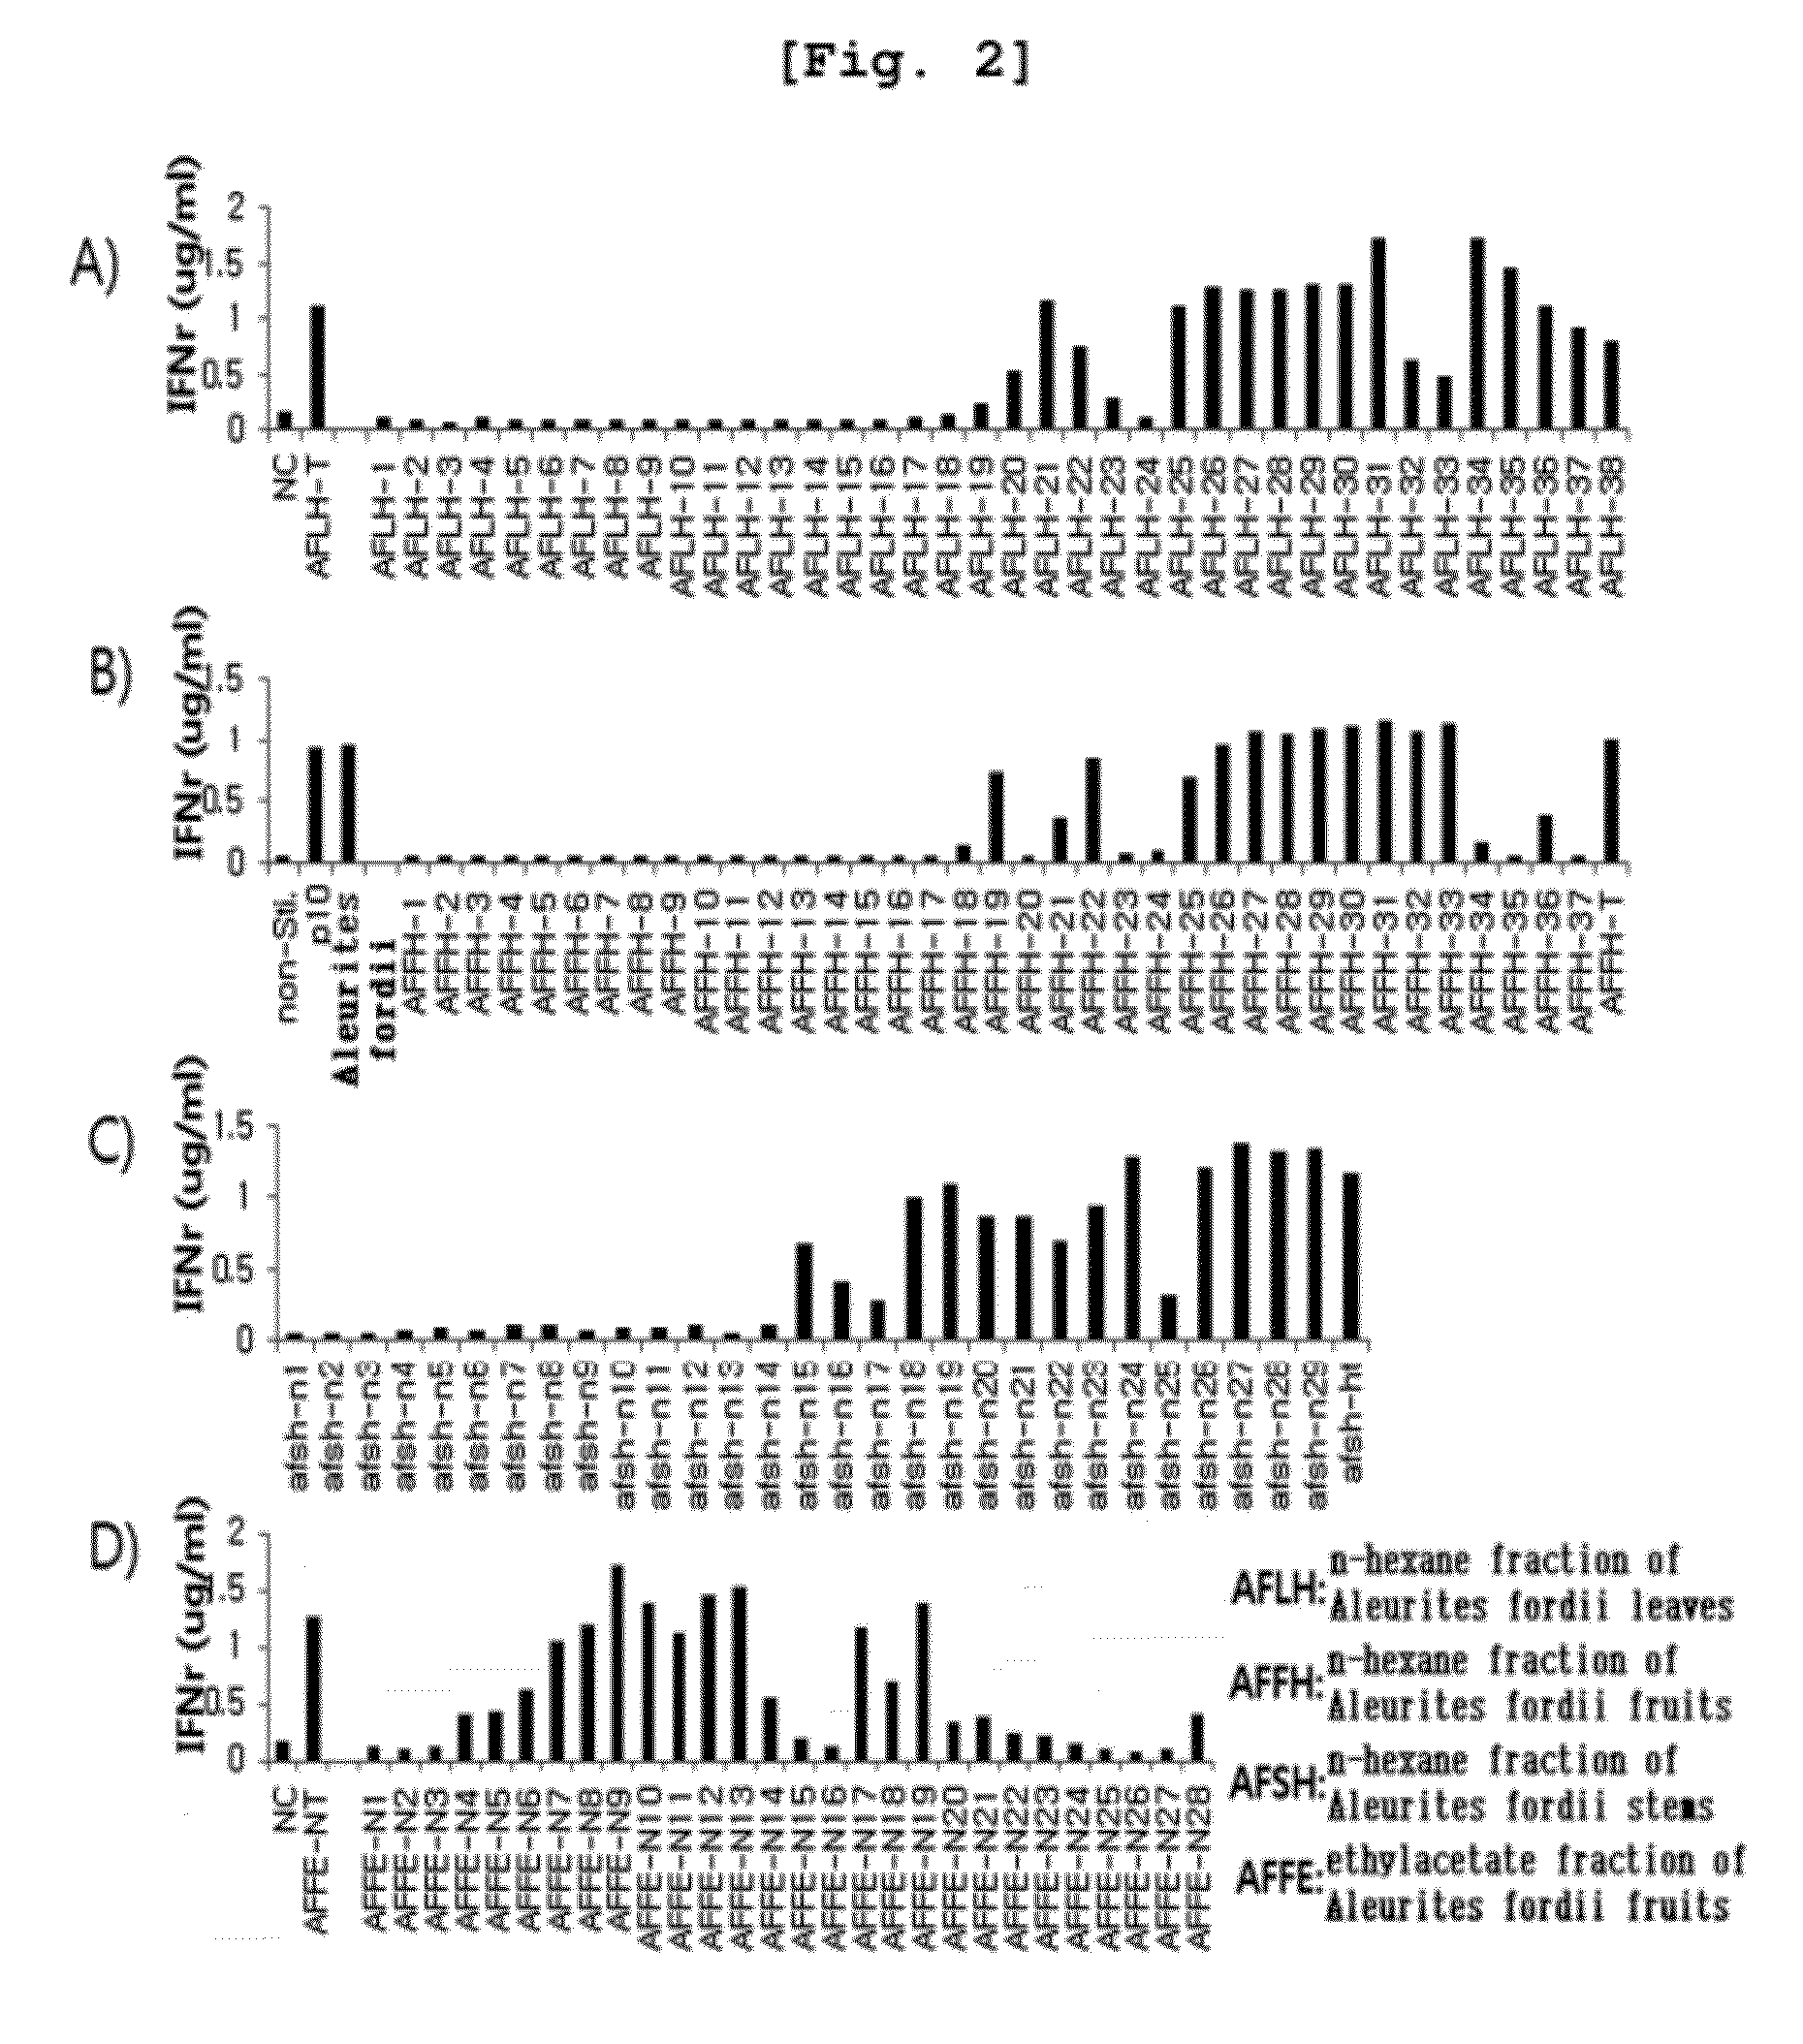 Antiviral composition containing an aleurites fordii or daphne kiusiana extract or a fraction thereof as an active ingredient